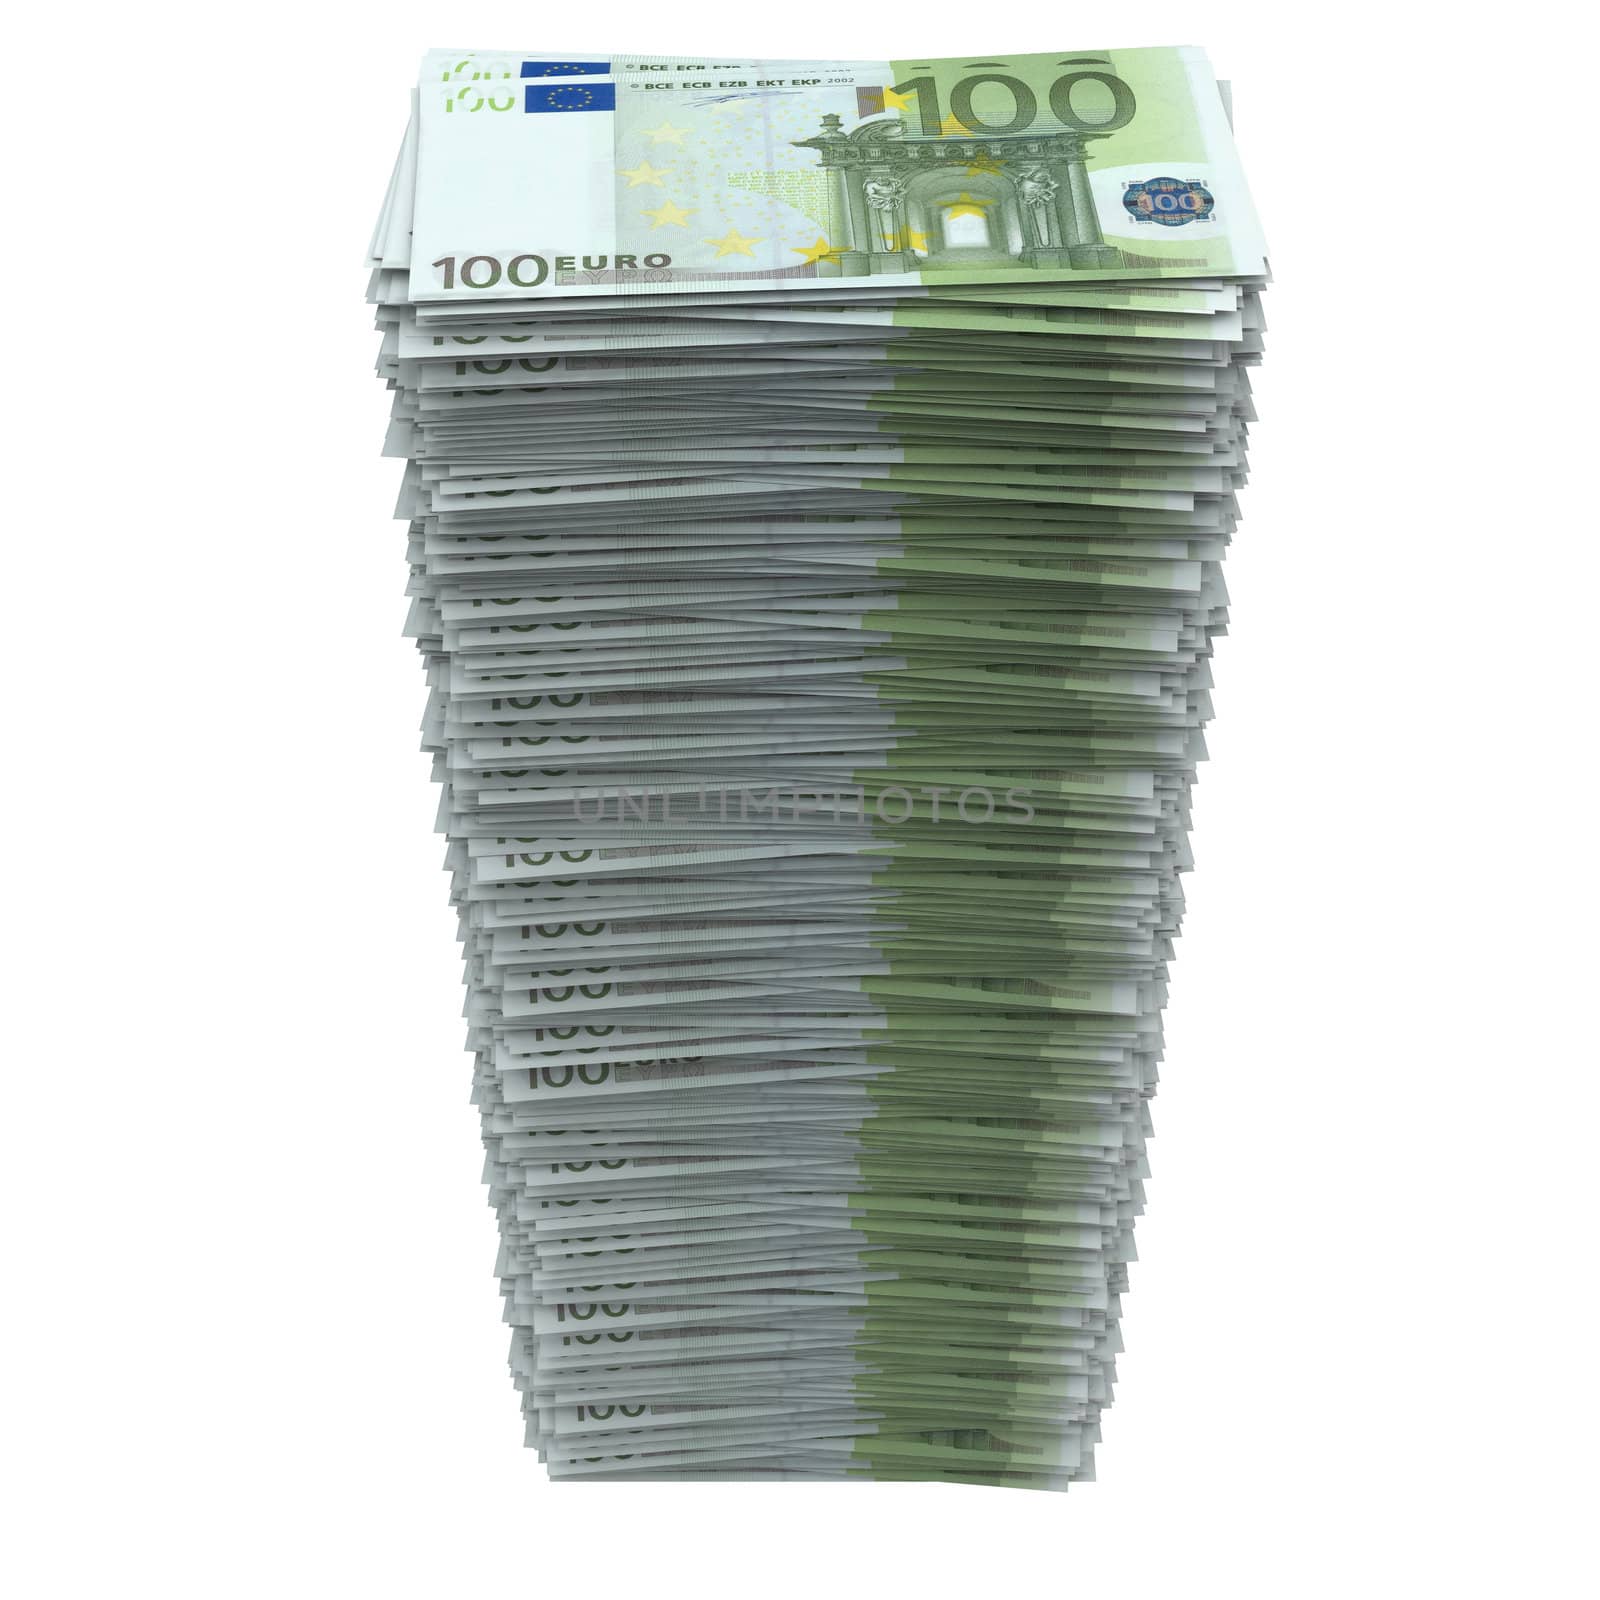 Stack of european currency. Isolated render on a white background